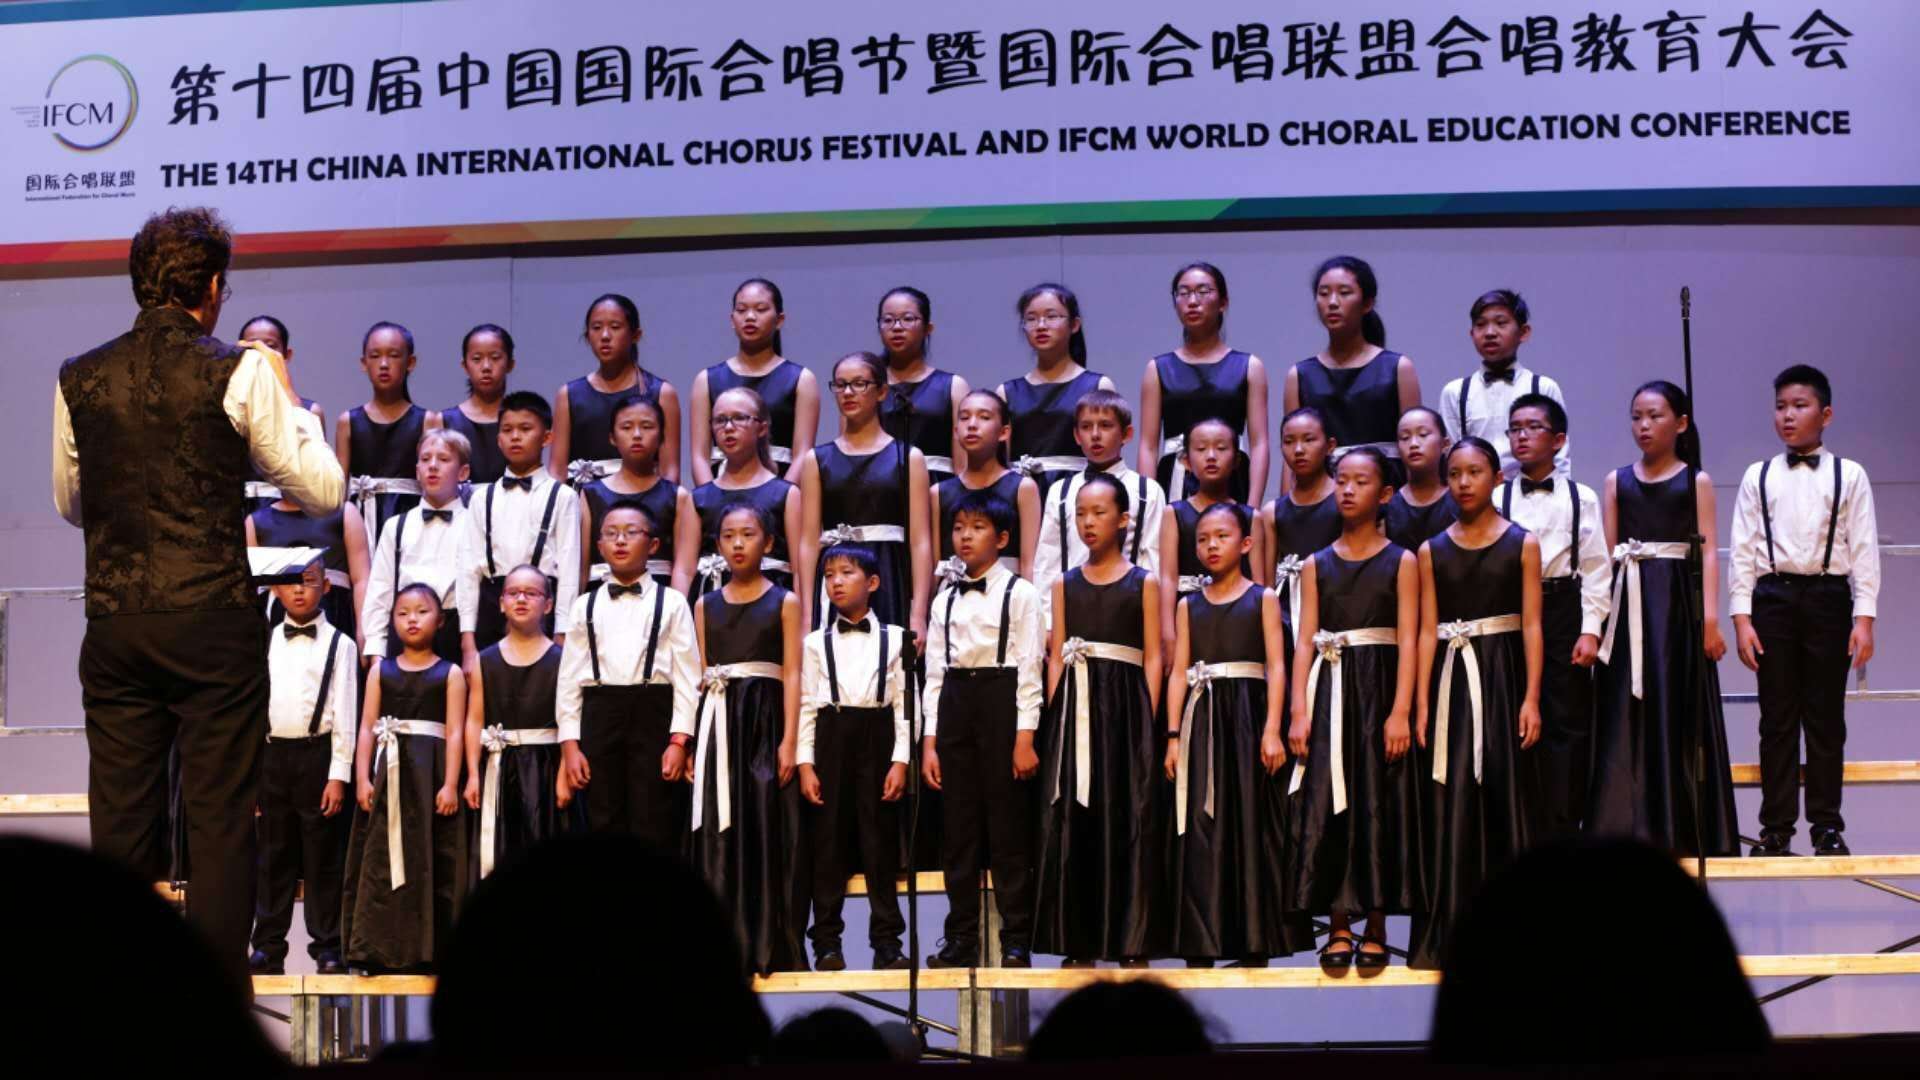 Antonio Llaca directing the Chinese Canadian Children’s Choir of Canada (C5) during a performance in the Tianquiao Performing Arts Center in Beijing. The C5 will perform in Havana directed by Llaca in March next year. Photo: Courtesy of the interviewee.